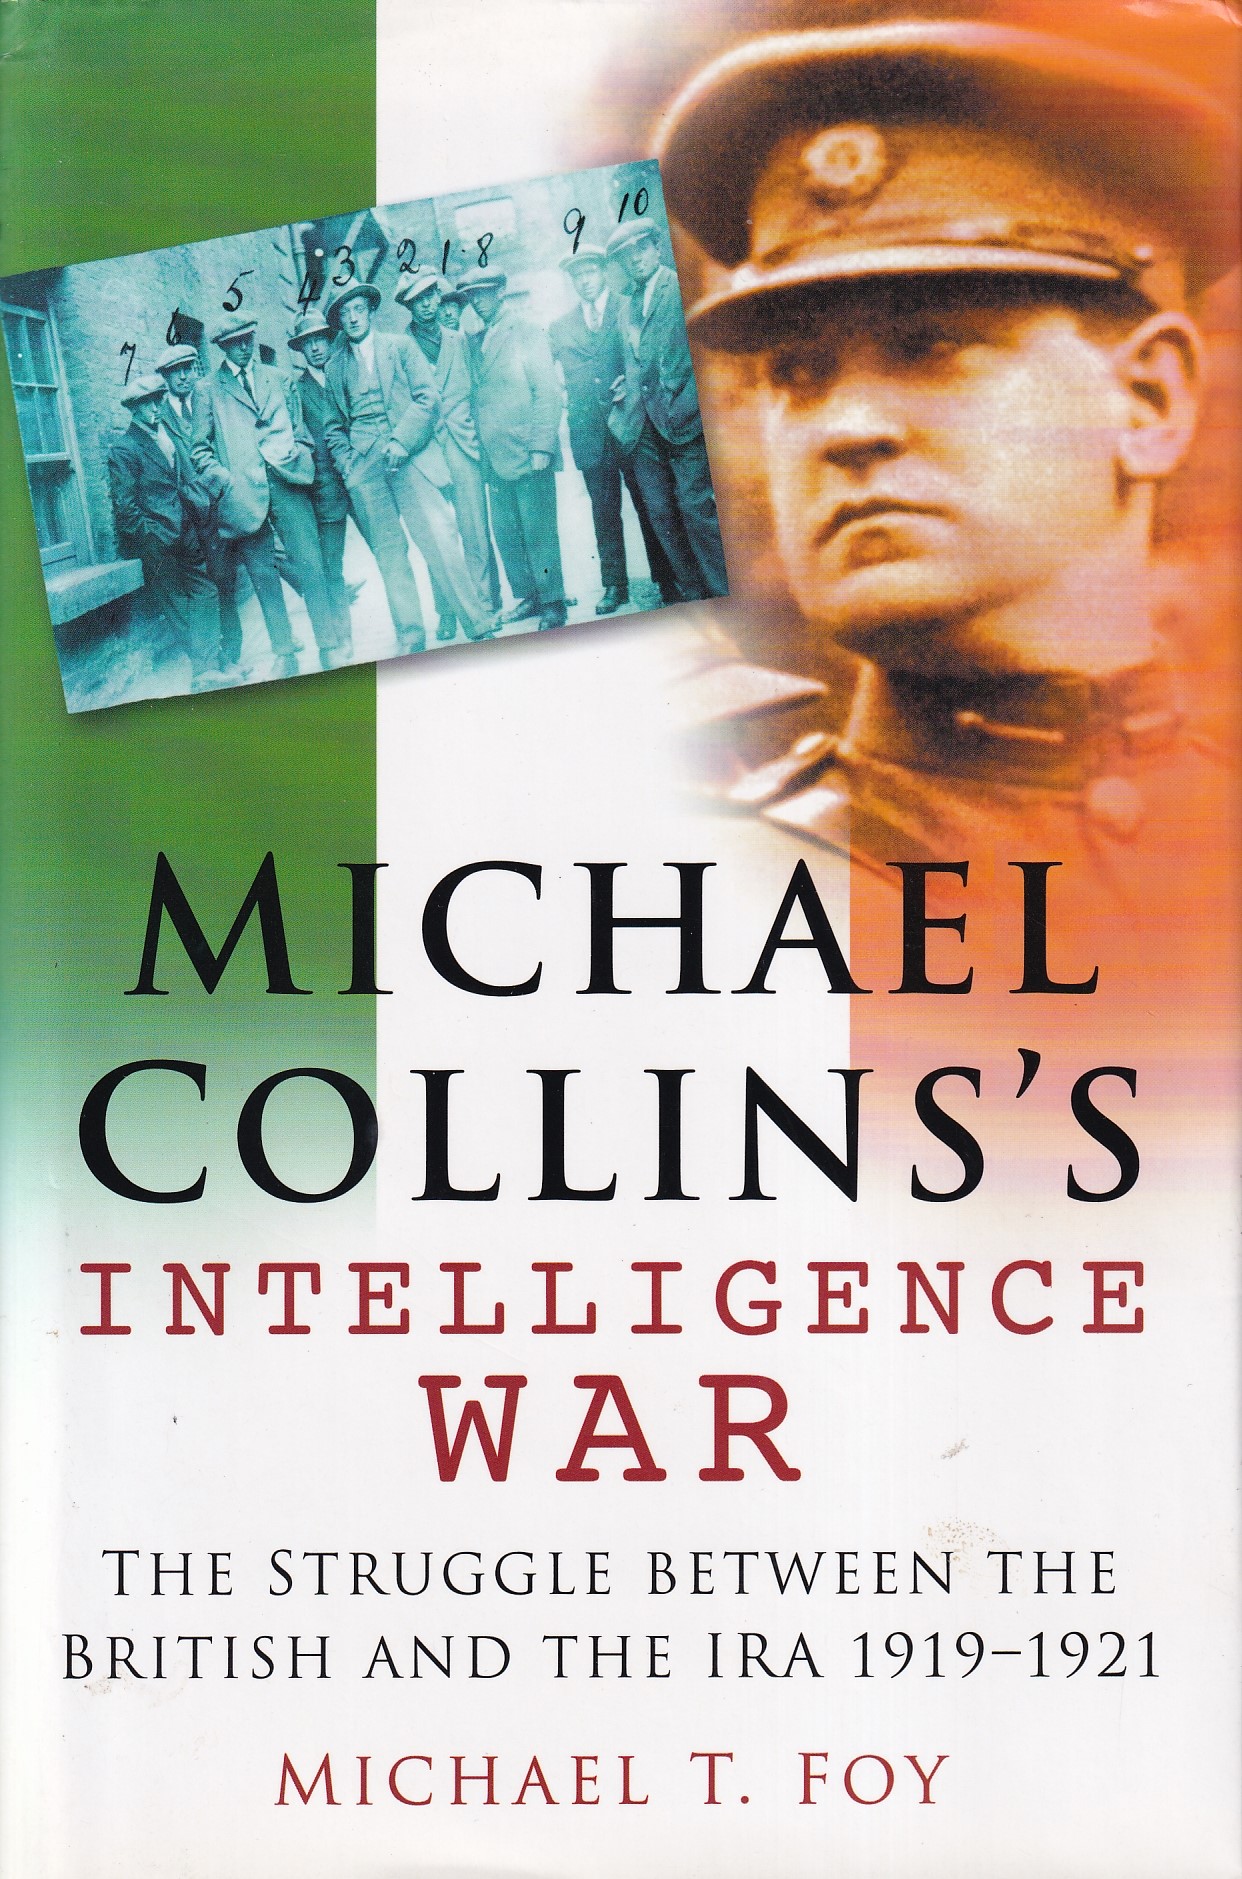 Michael Collins’s Intelligence War: The Struggle Between the British and the IRA 1919-1921 by Michael T. Foy